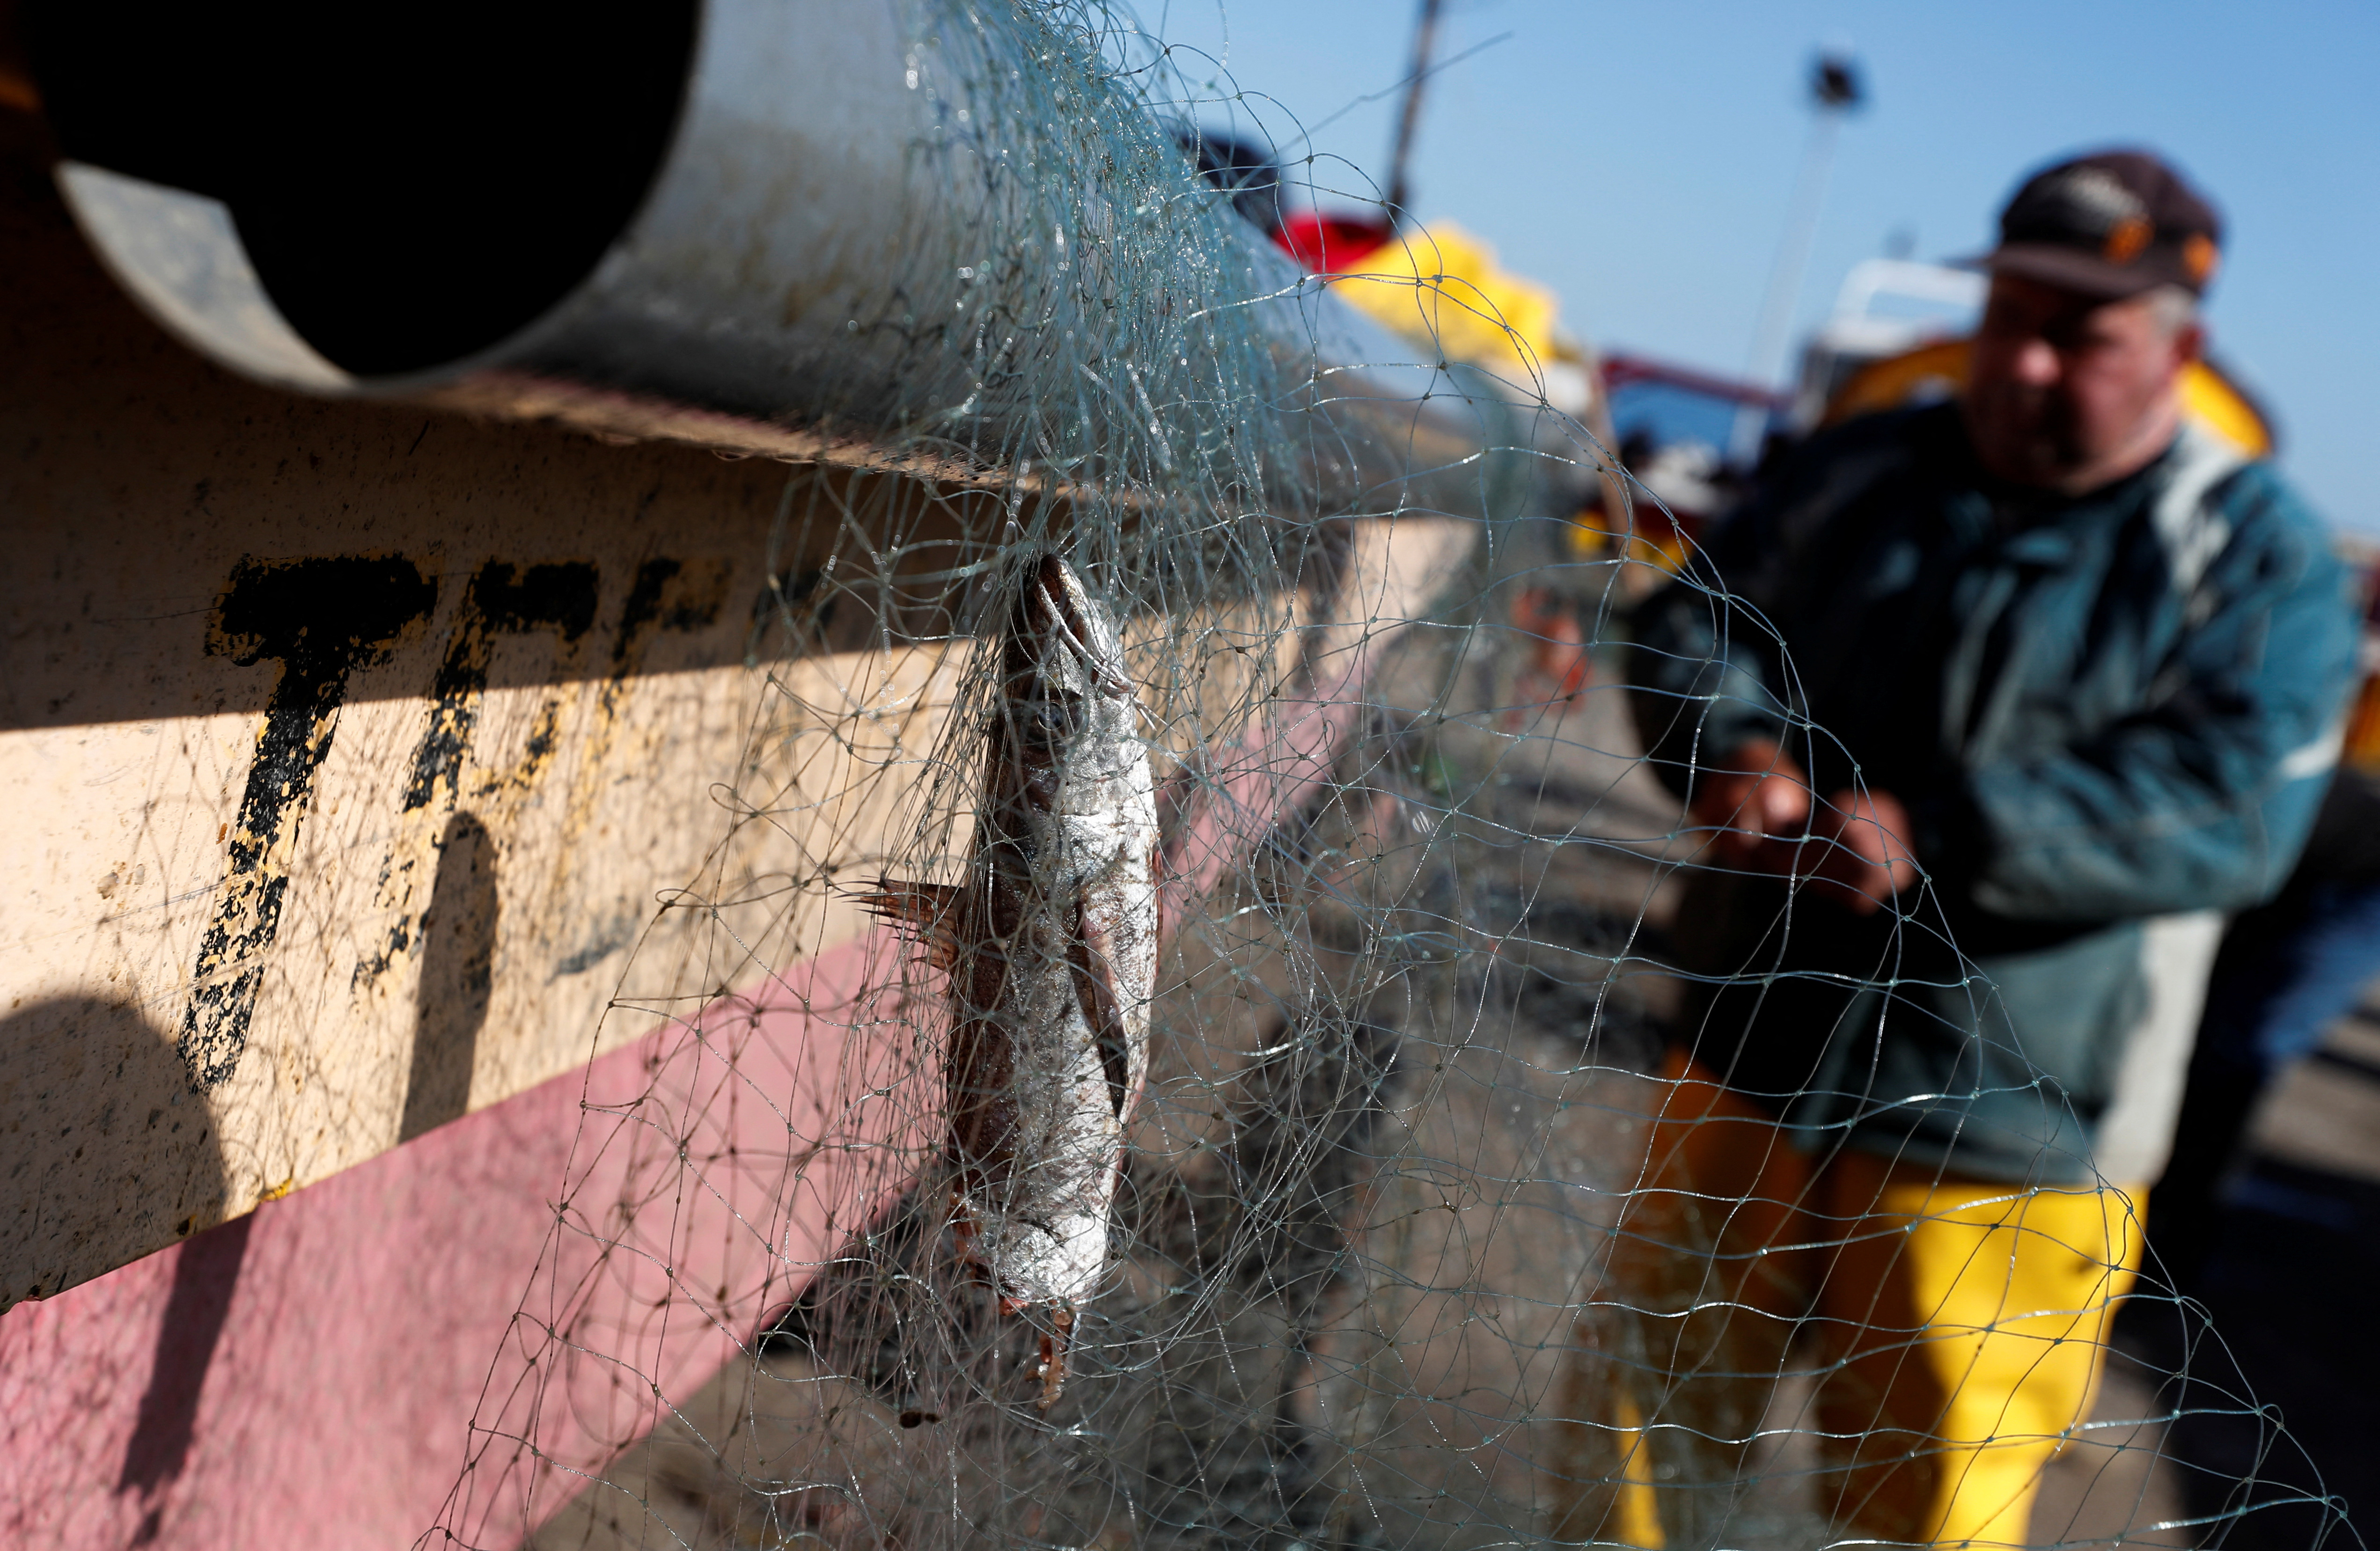 A fish chewed by sea lions is seen in a fishing net at a fishermen's cove in Valparaiso